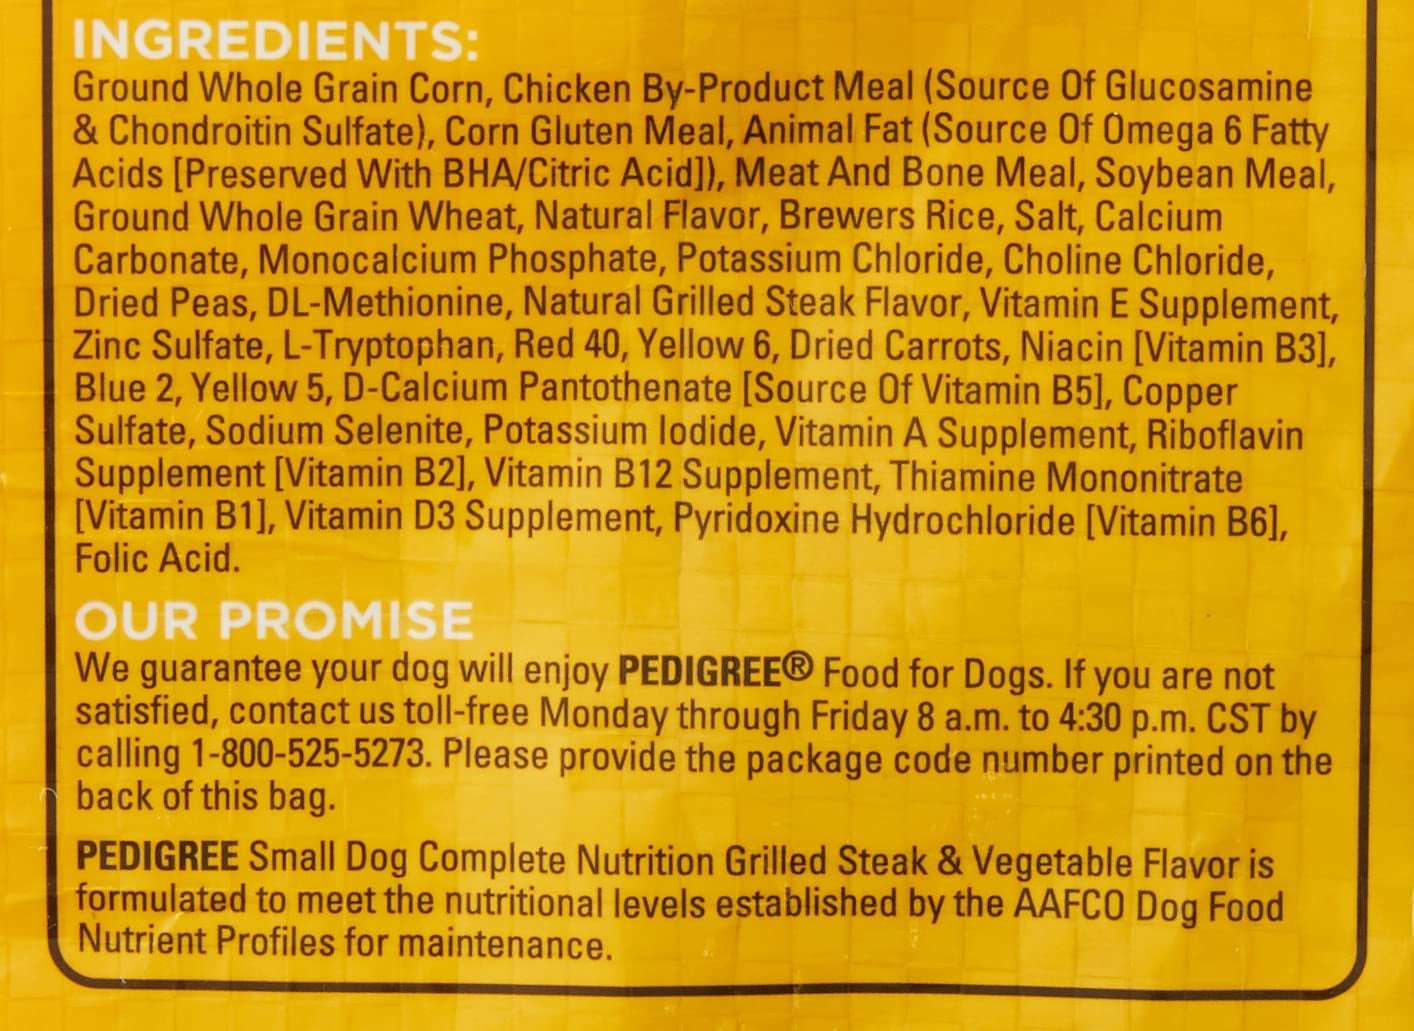 Small Dog Complete Nutrition Small Breed Adult Dry Food Grilled Steak and Vegetable Flavor 